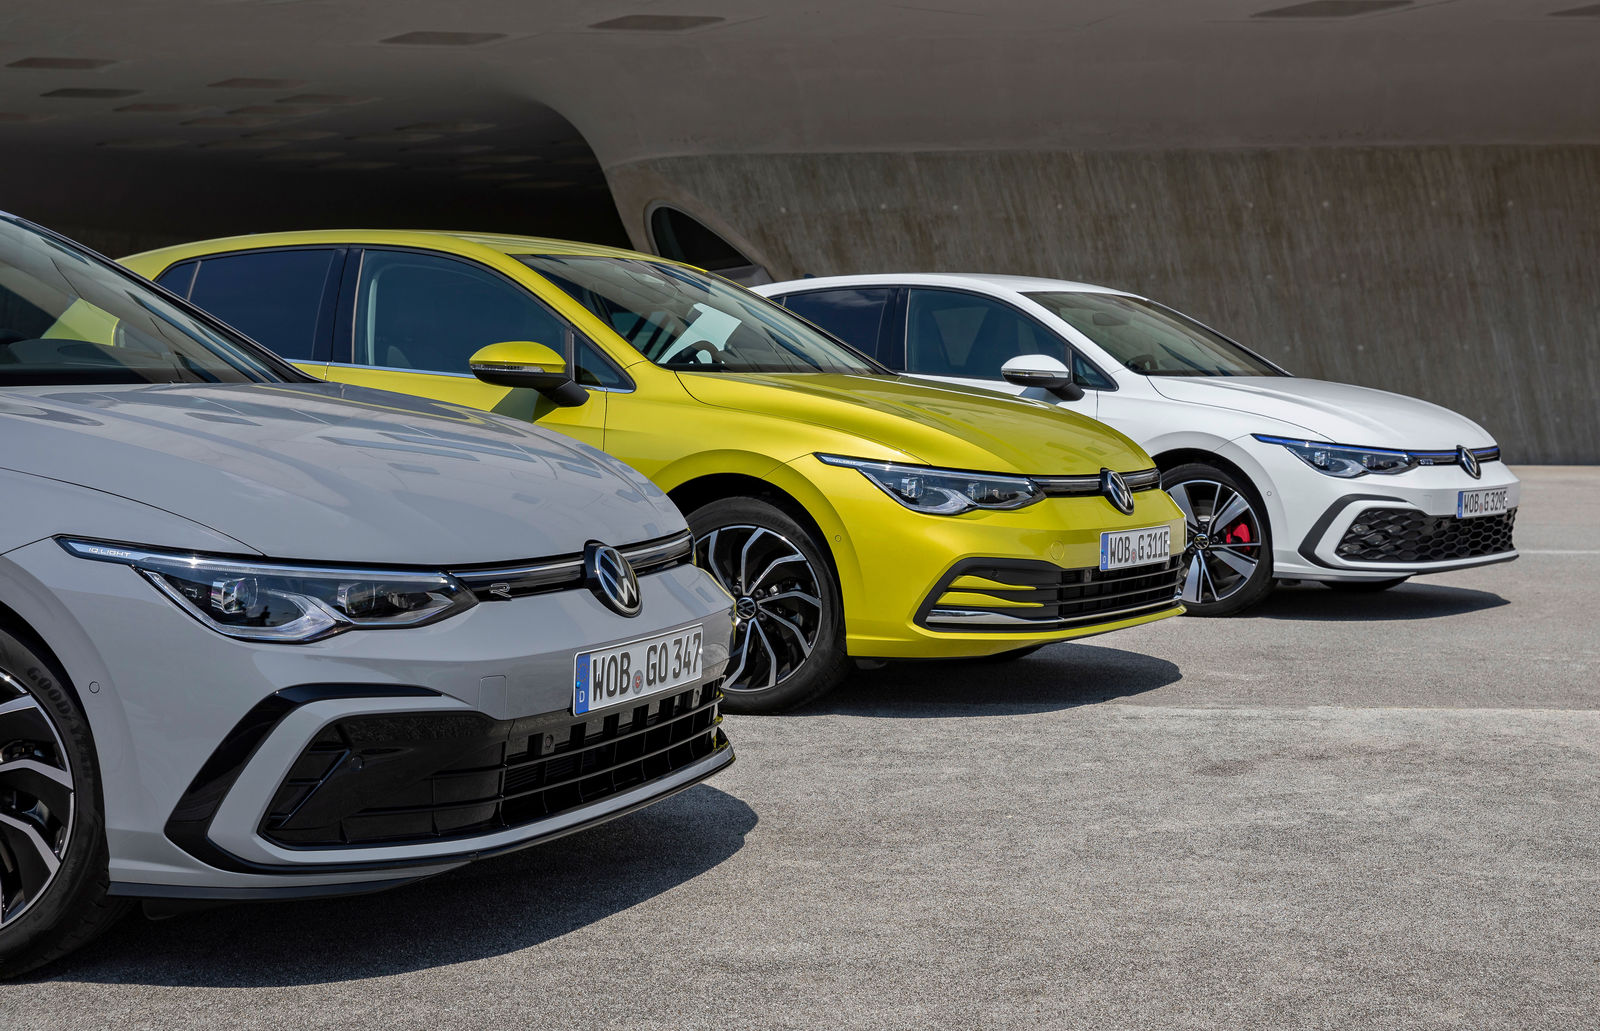 The Golf once again the favorite car of Germans and Europeans in 2020